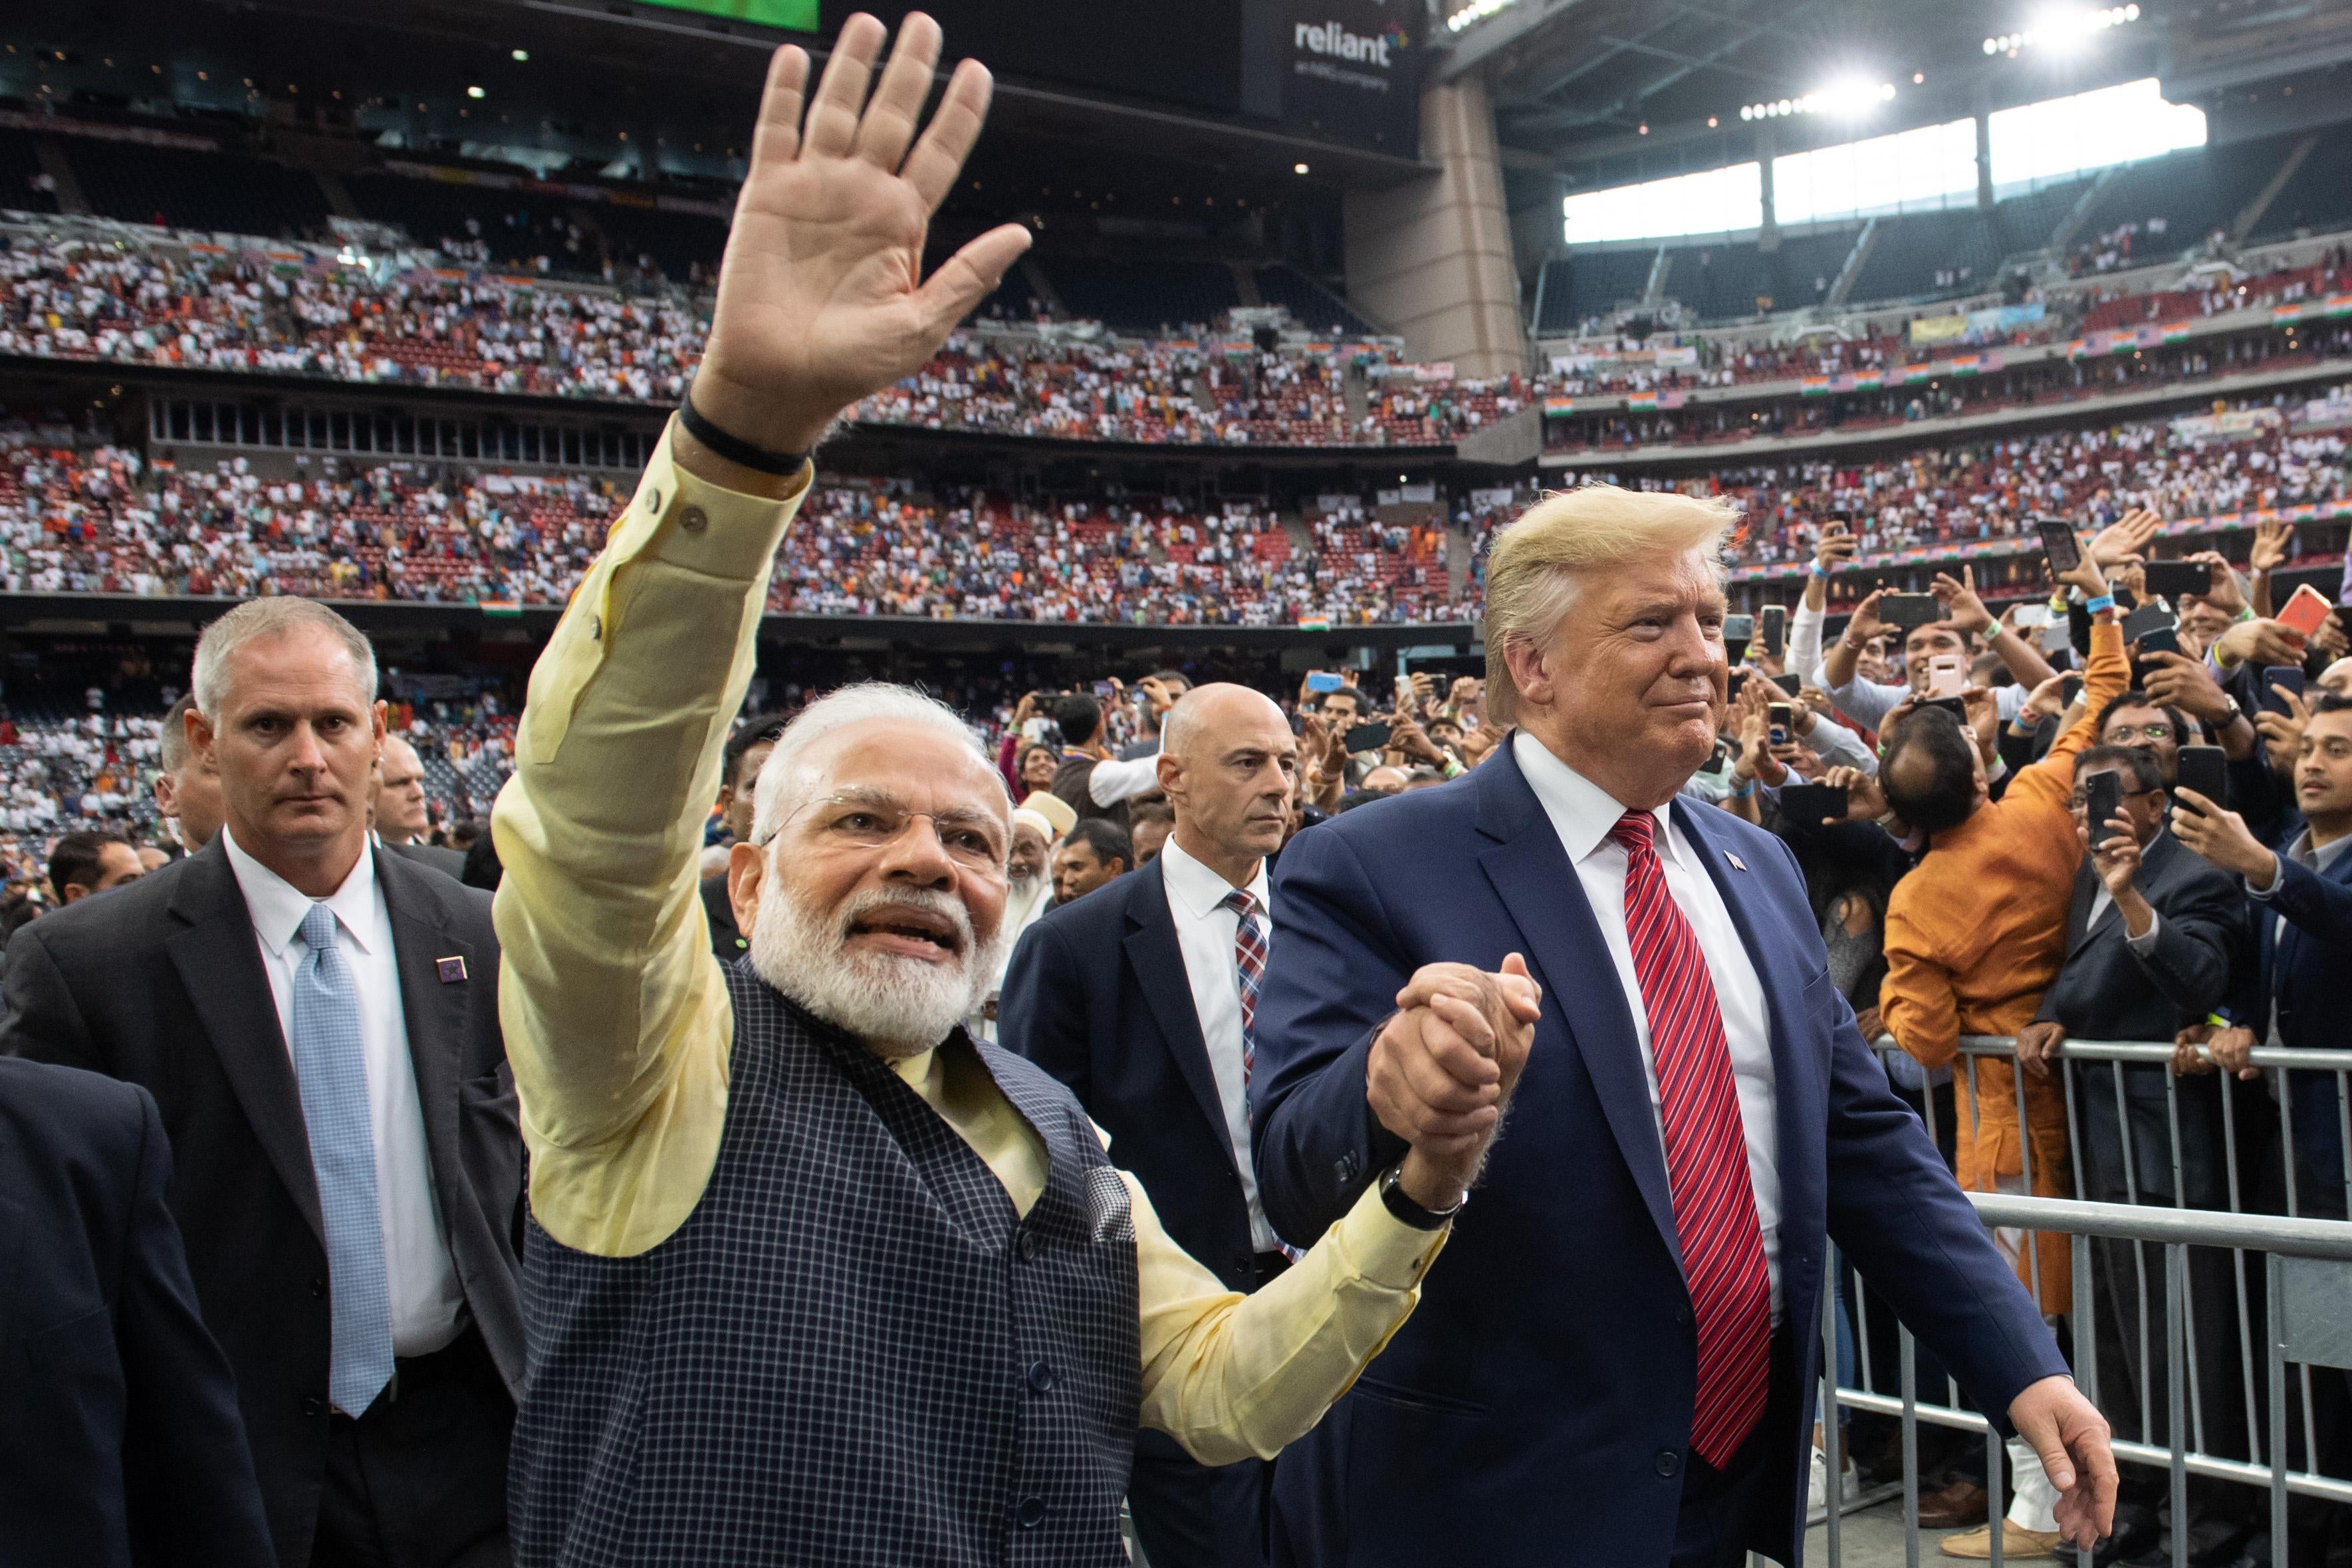 Modi and Trump hold hands as Modi waves at the crowd.